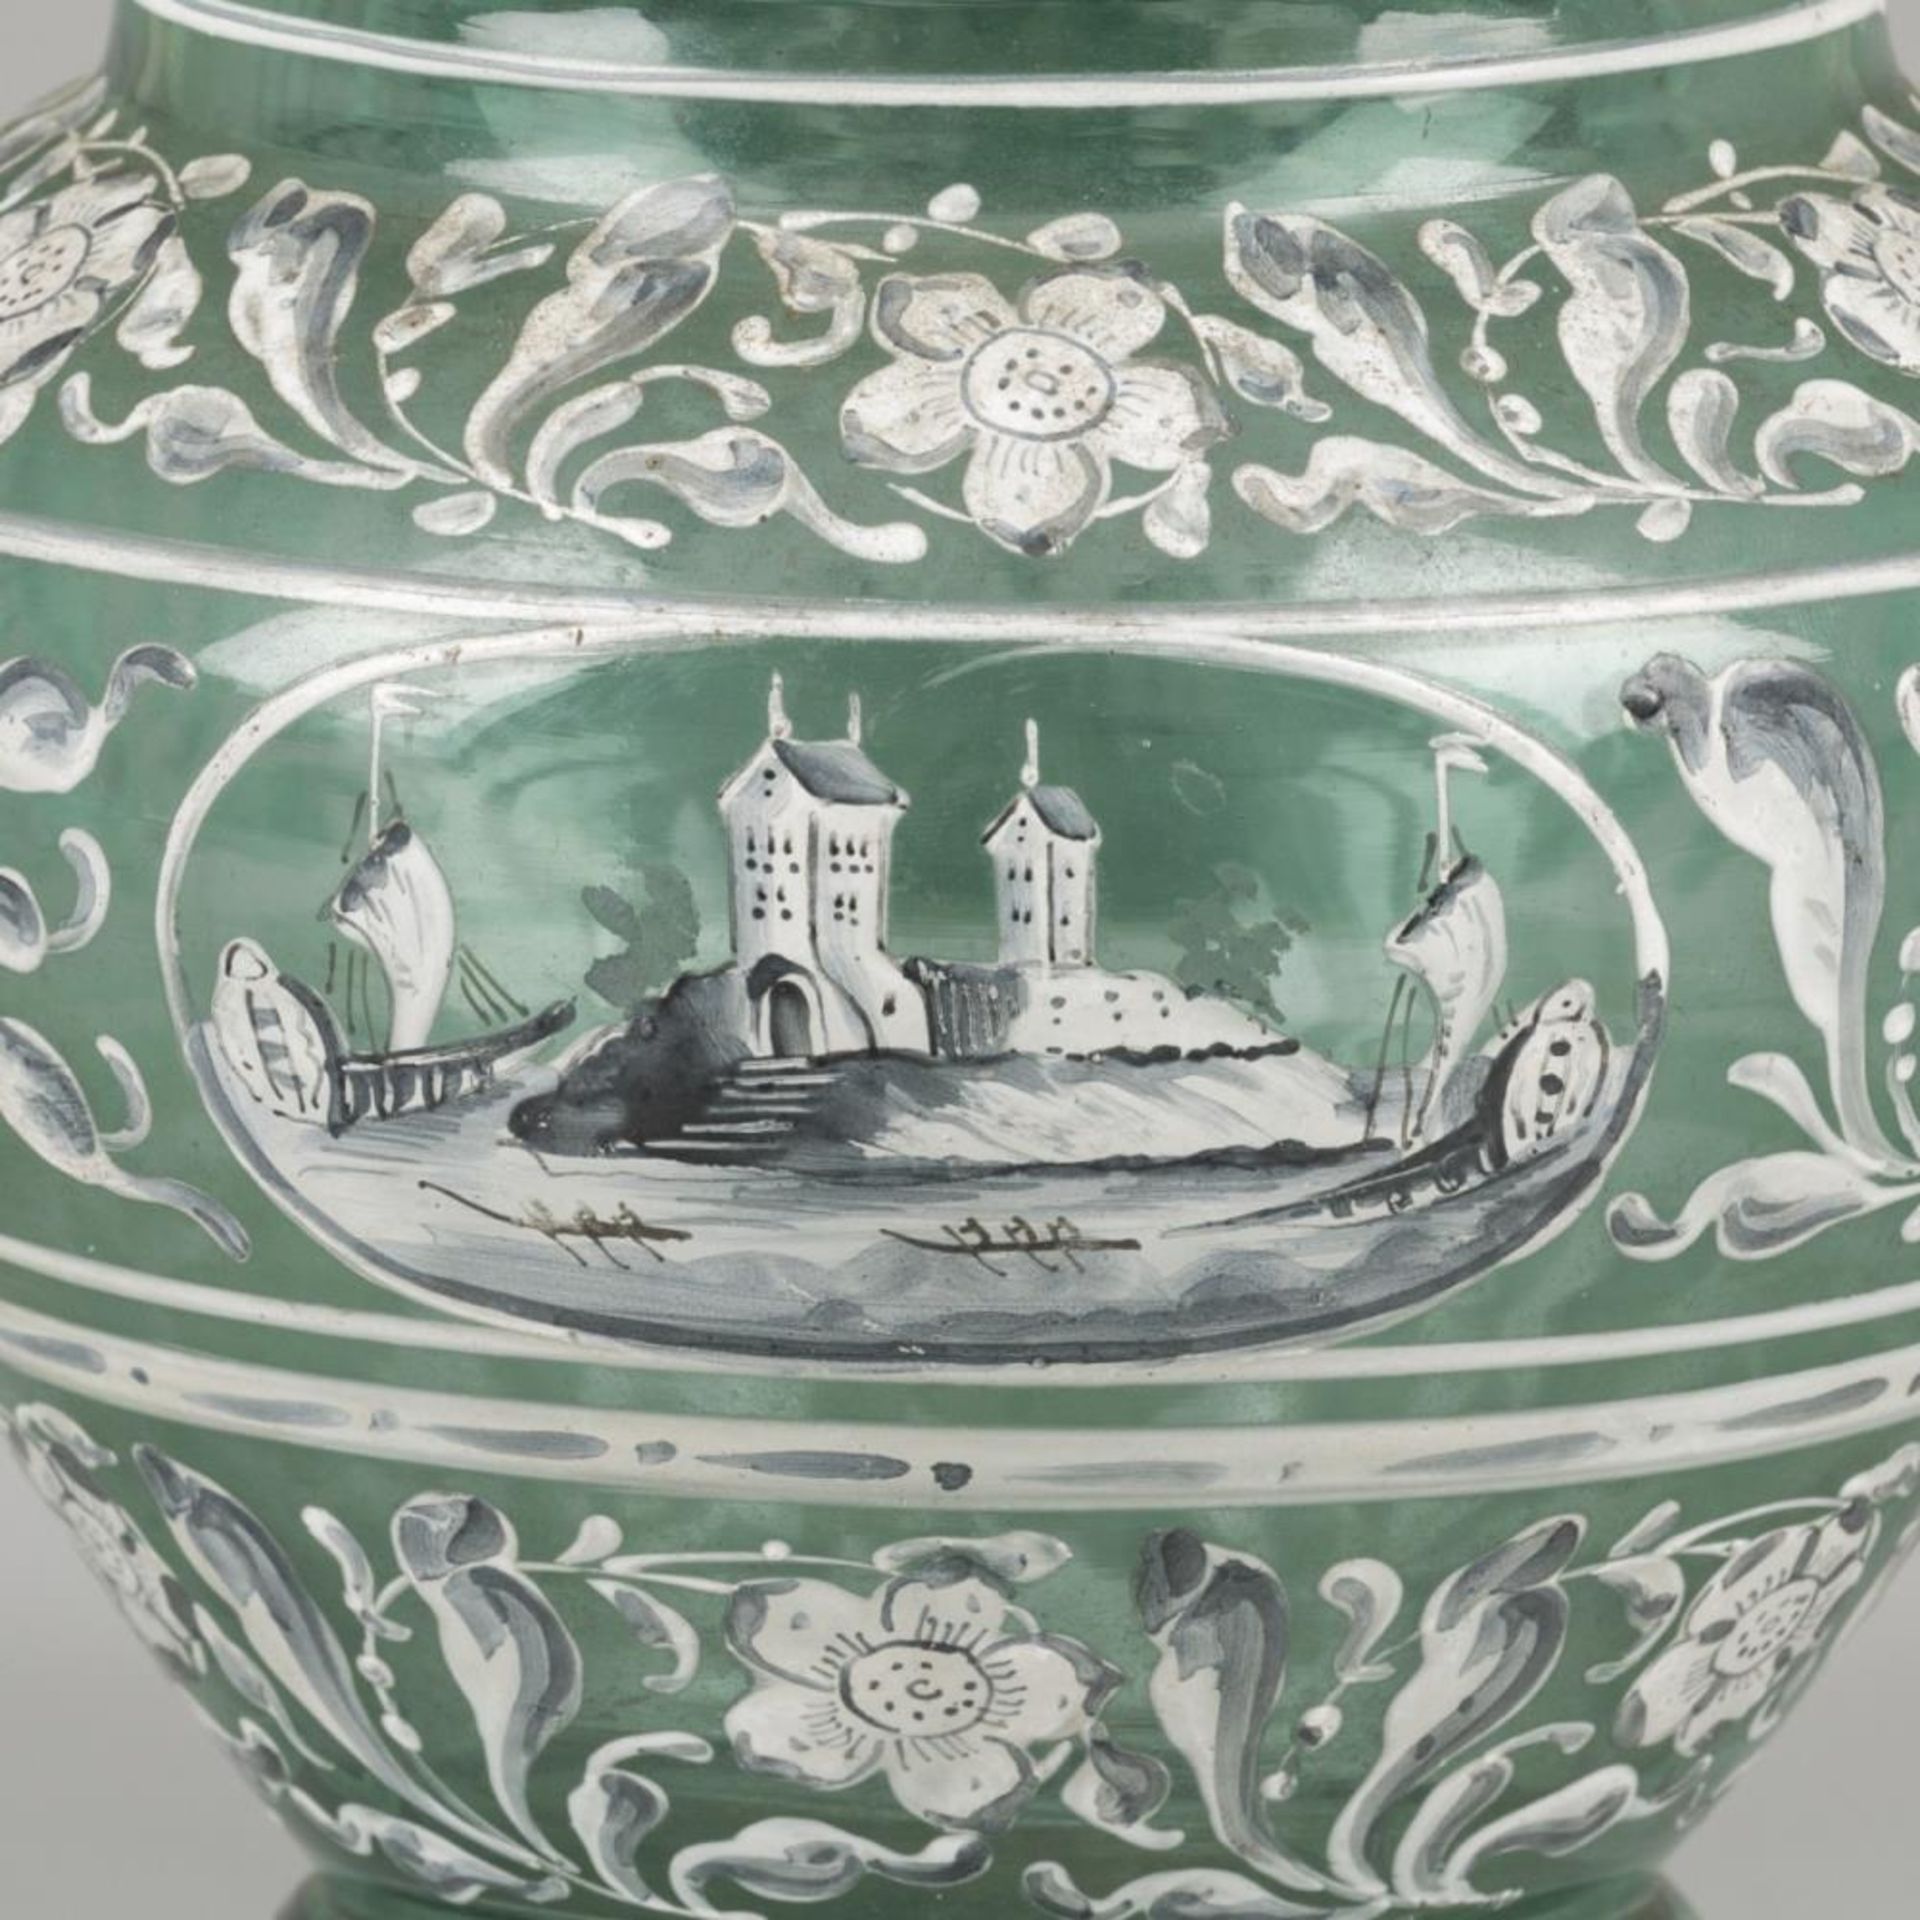 A glass vase with enamelled motif, Italy, 19th century. - Image 2 of 7